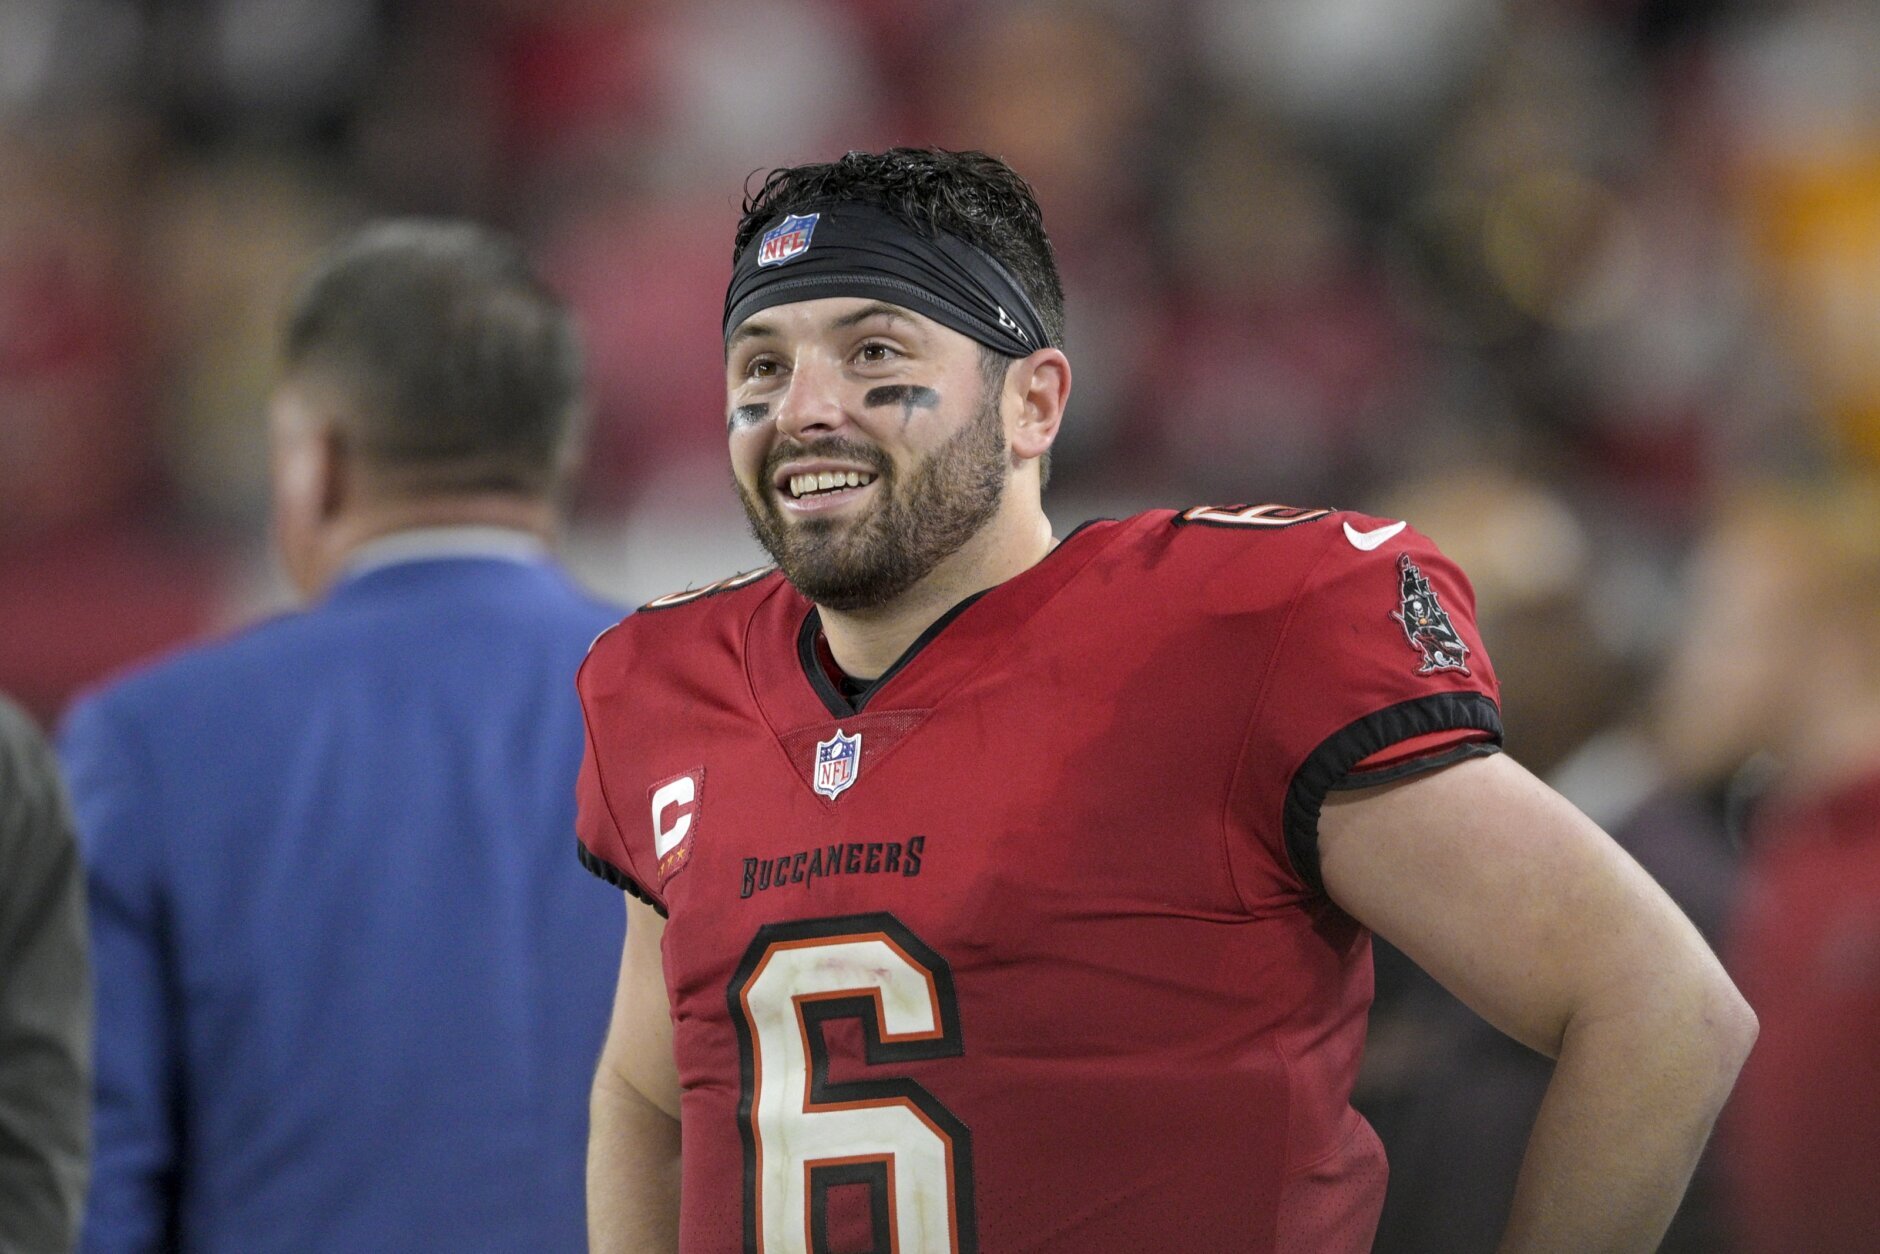 Mayfield throws for 337 yards and 3 TDs to lead Buccaneers to 329 NFC